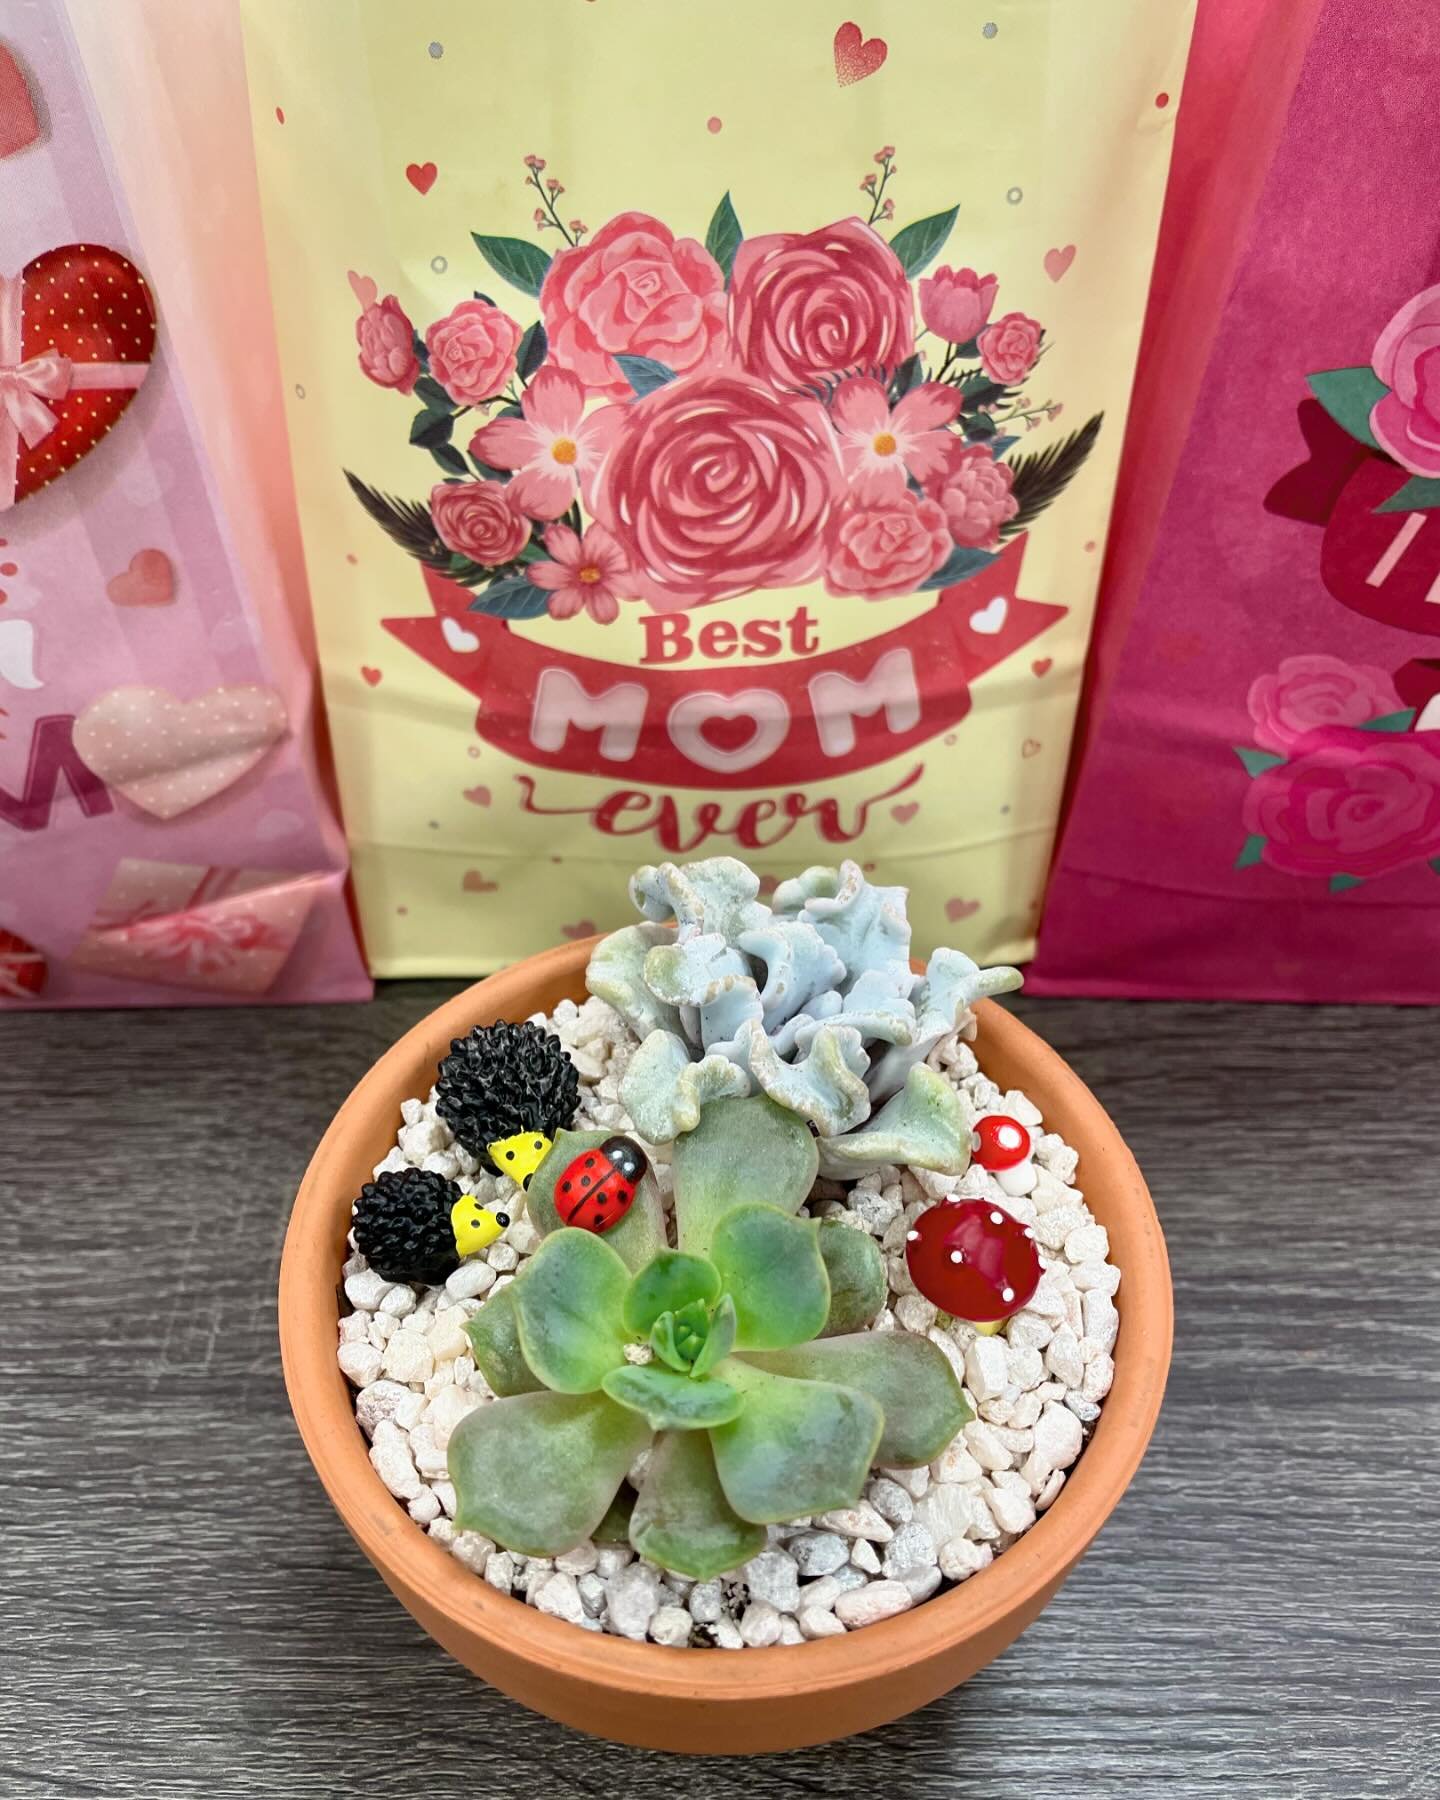 Need a present for Mother&rsquo;s Day❤️? 

Well, our diy succulent kits are back and would make the perfect present. Not only that, but we now have diy anthurium🌱 kits as well! Both kits are only $15 each. Come down and check it out! 

Succulent kit